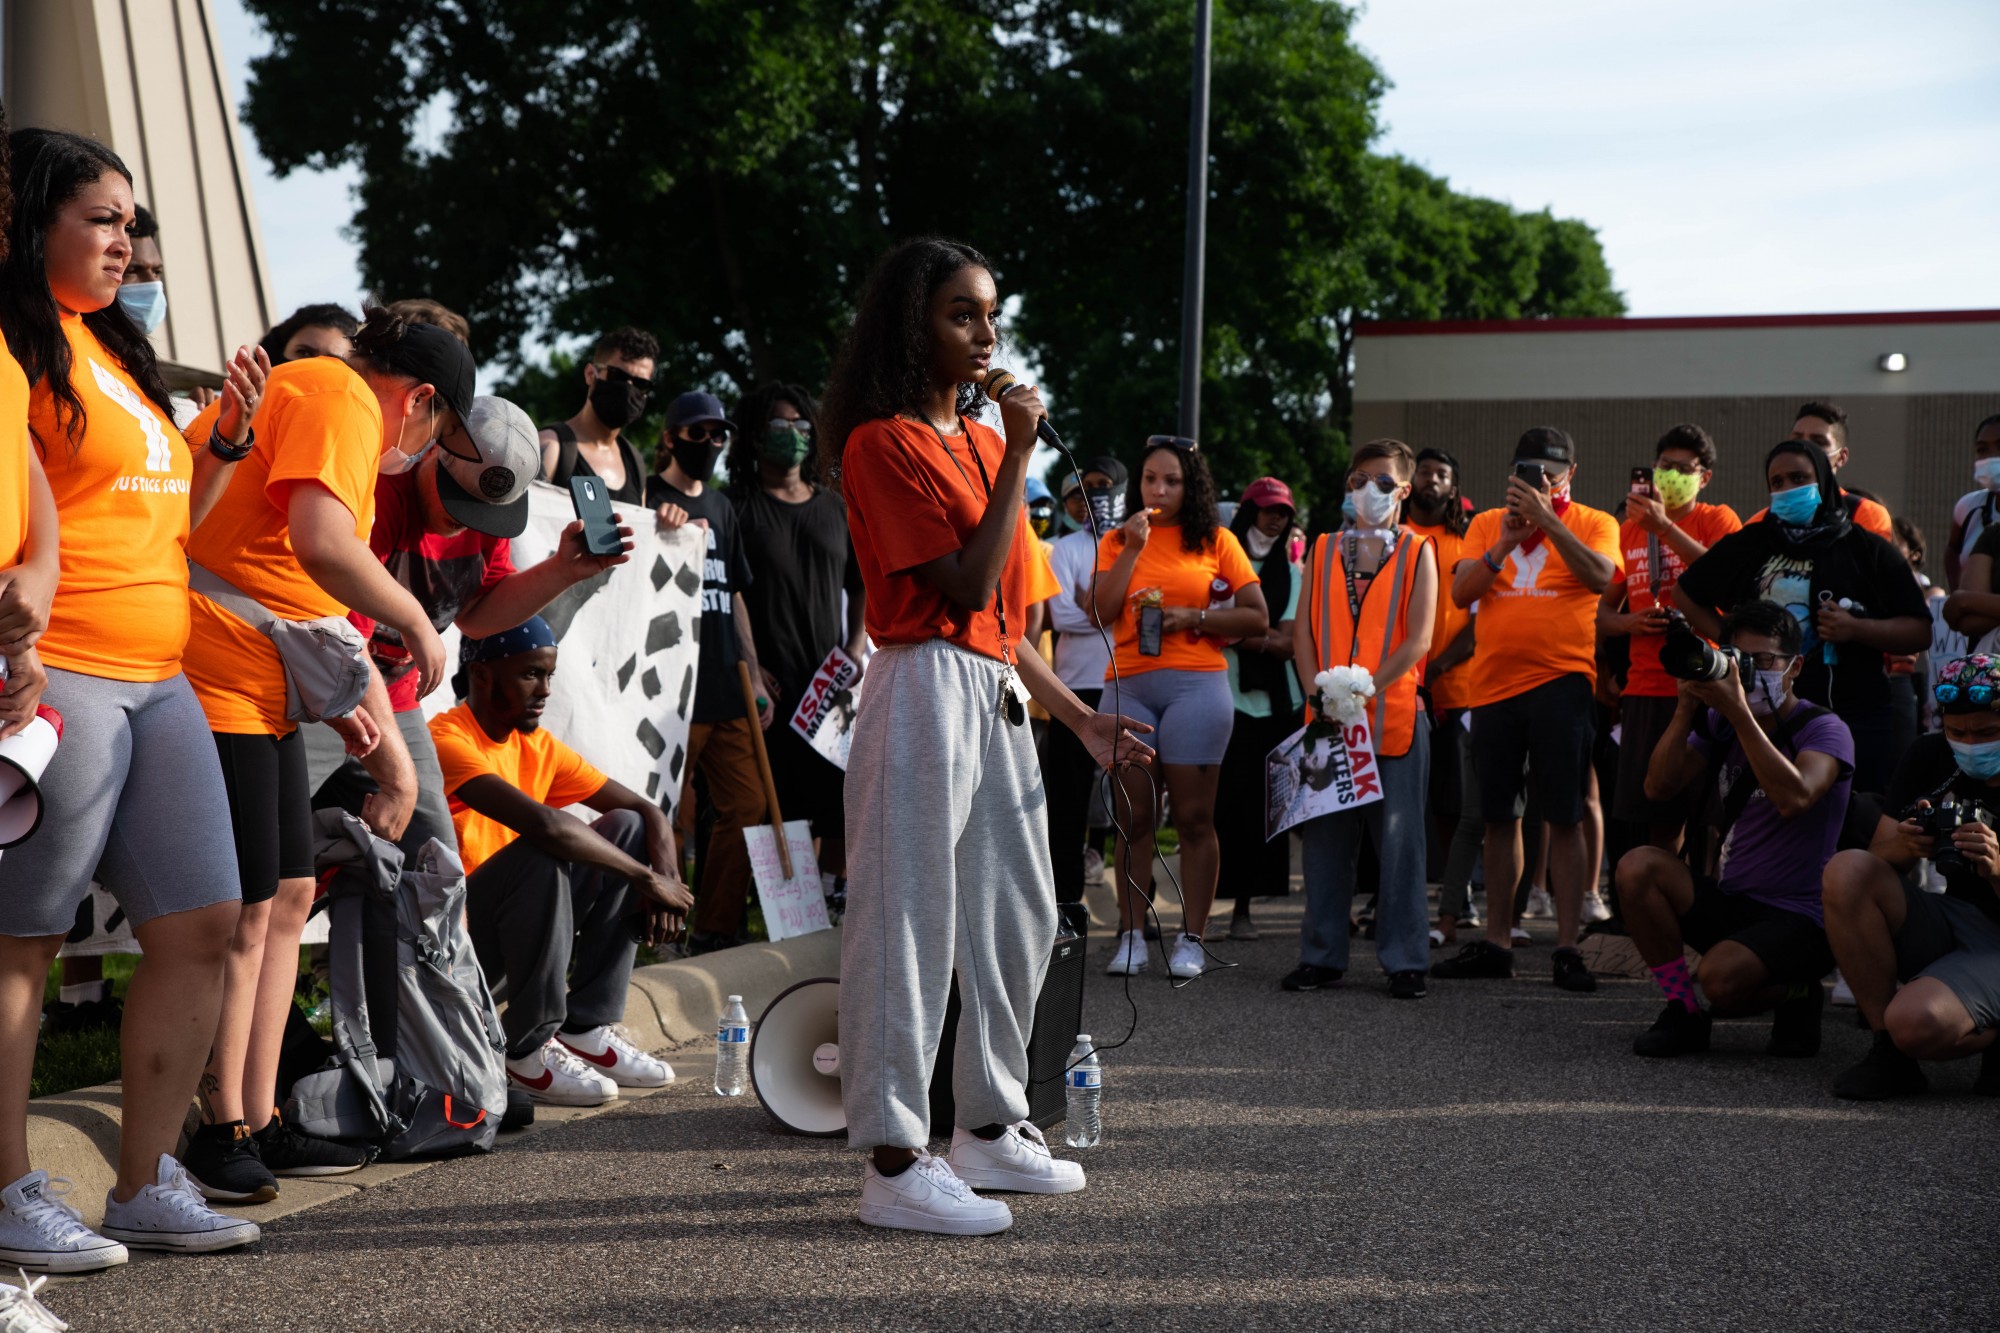 Sumaya Aden, Isak Aden’s sister, addresses protesters in a parking lot near Twin Cities Premium Outlets, the site where police killed 23-year-old Isak Aden in July of 2019 in Eagan on Wednesday, July 1. 